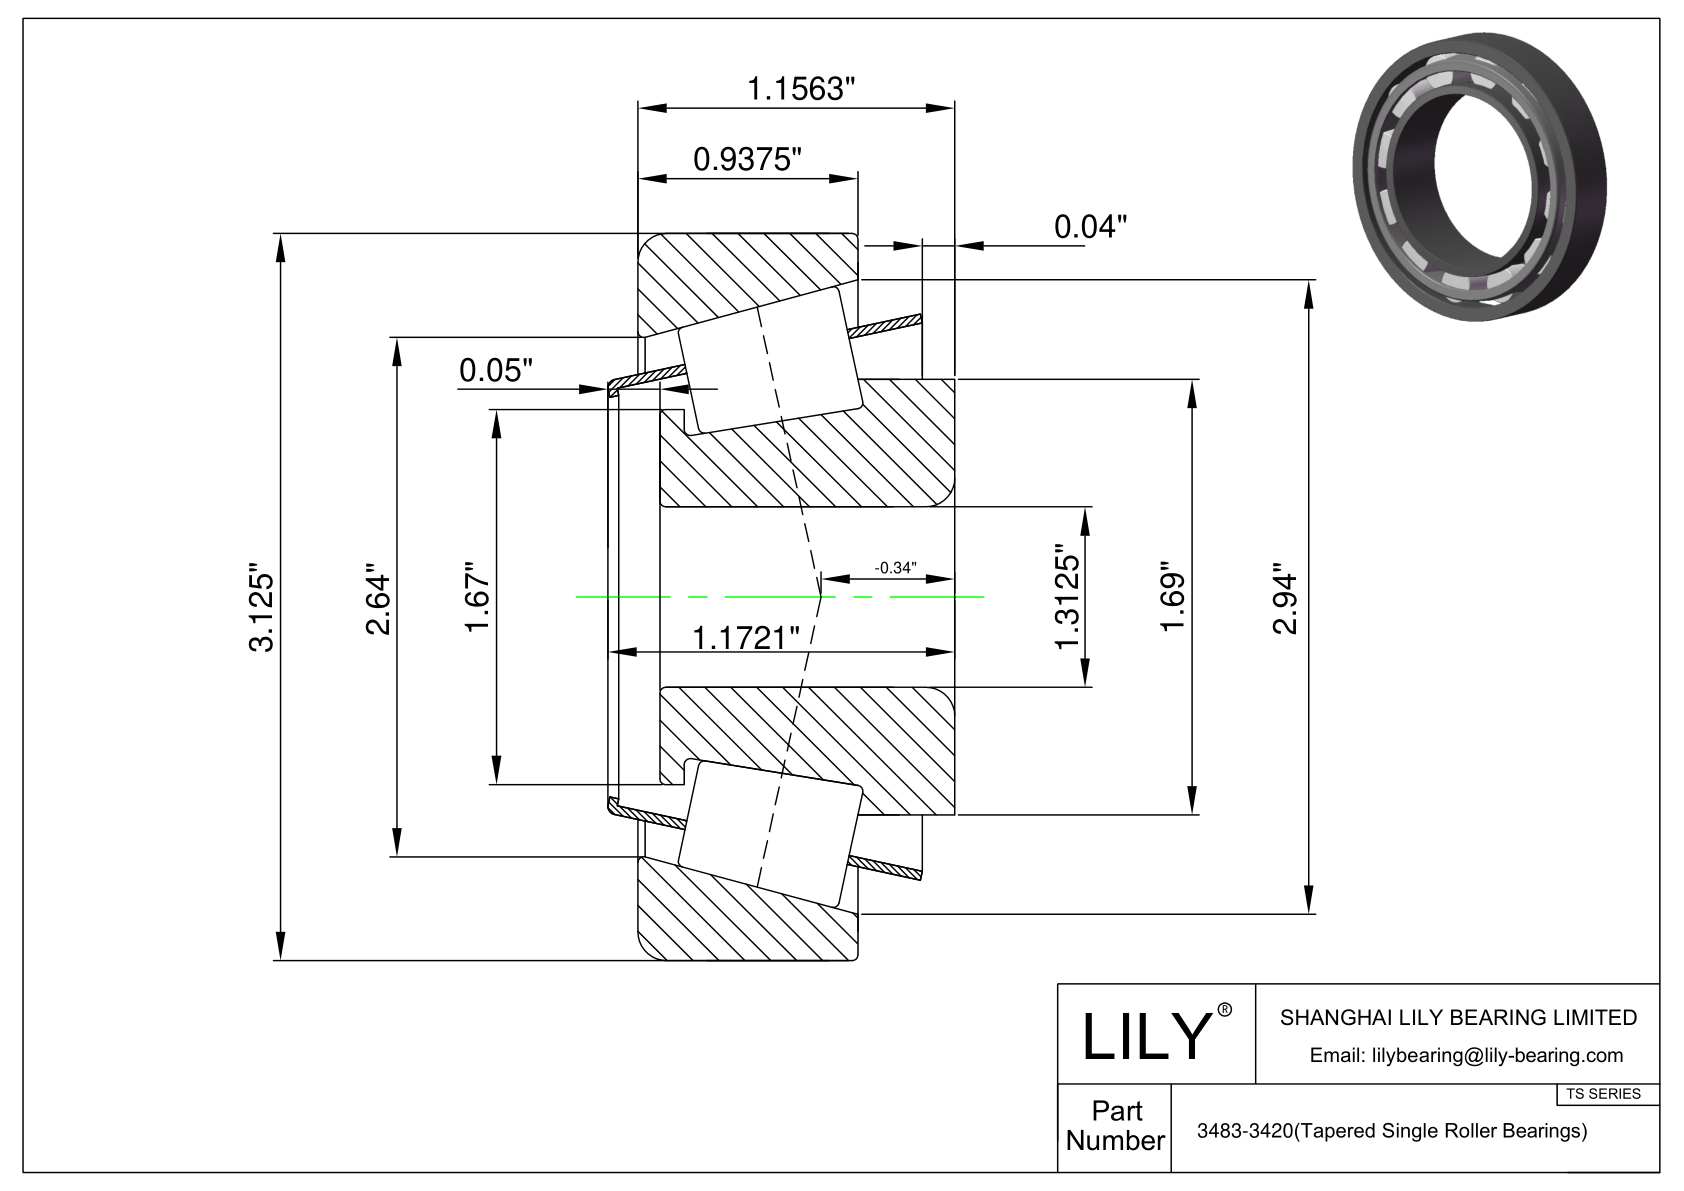 3483-3420 TS (Tapered Single Roller Bearings) (Imperial) cad drawing